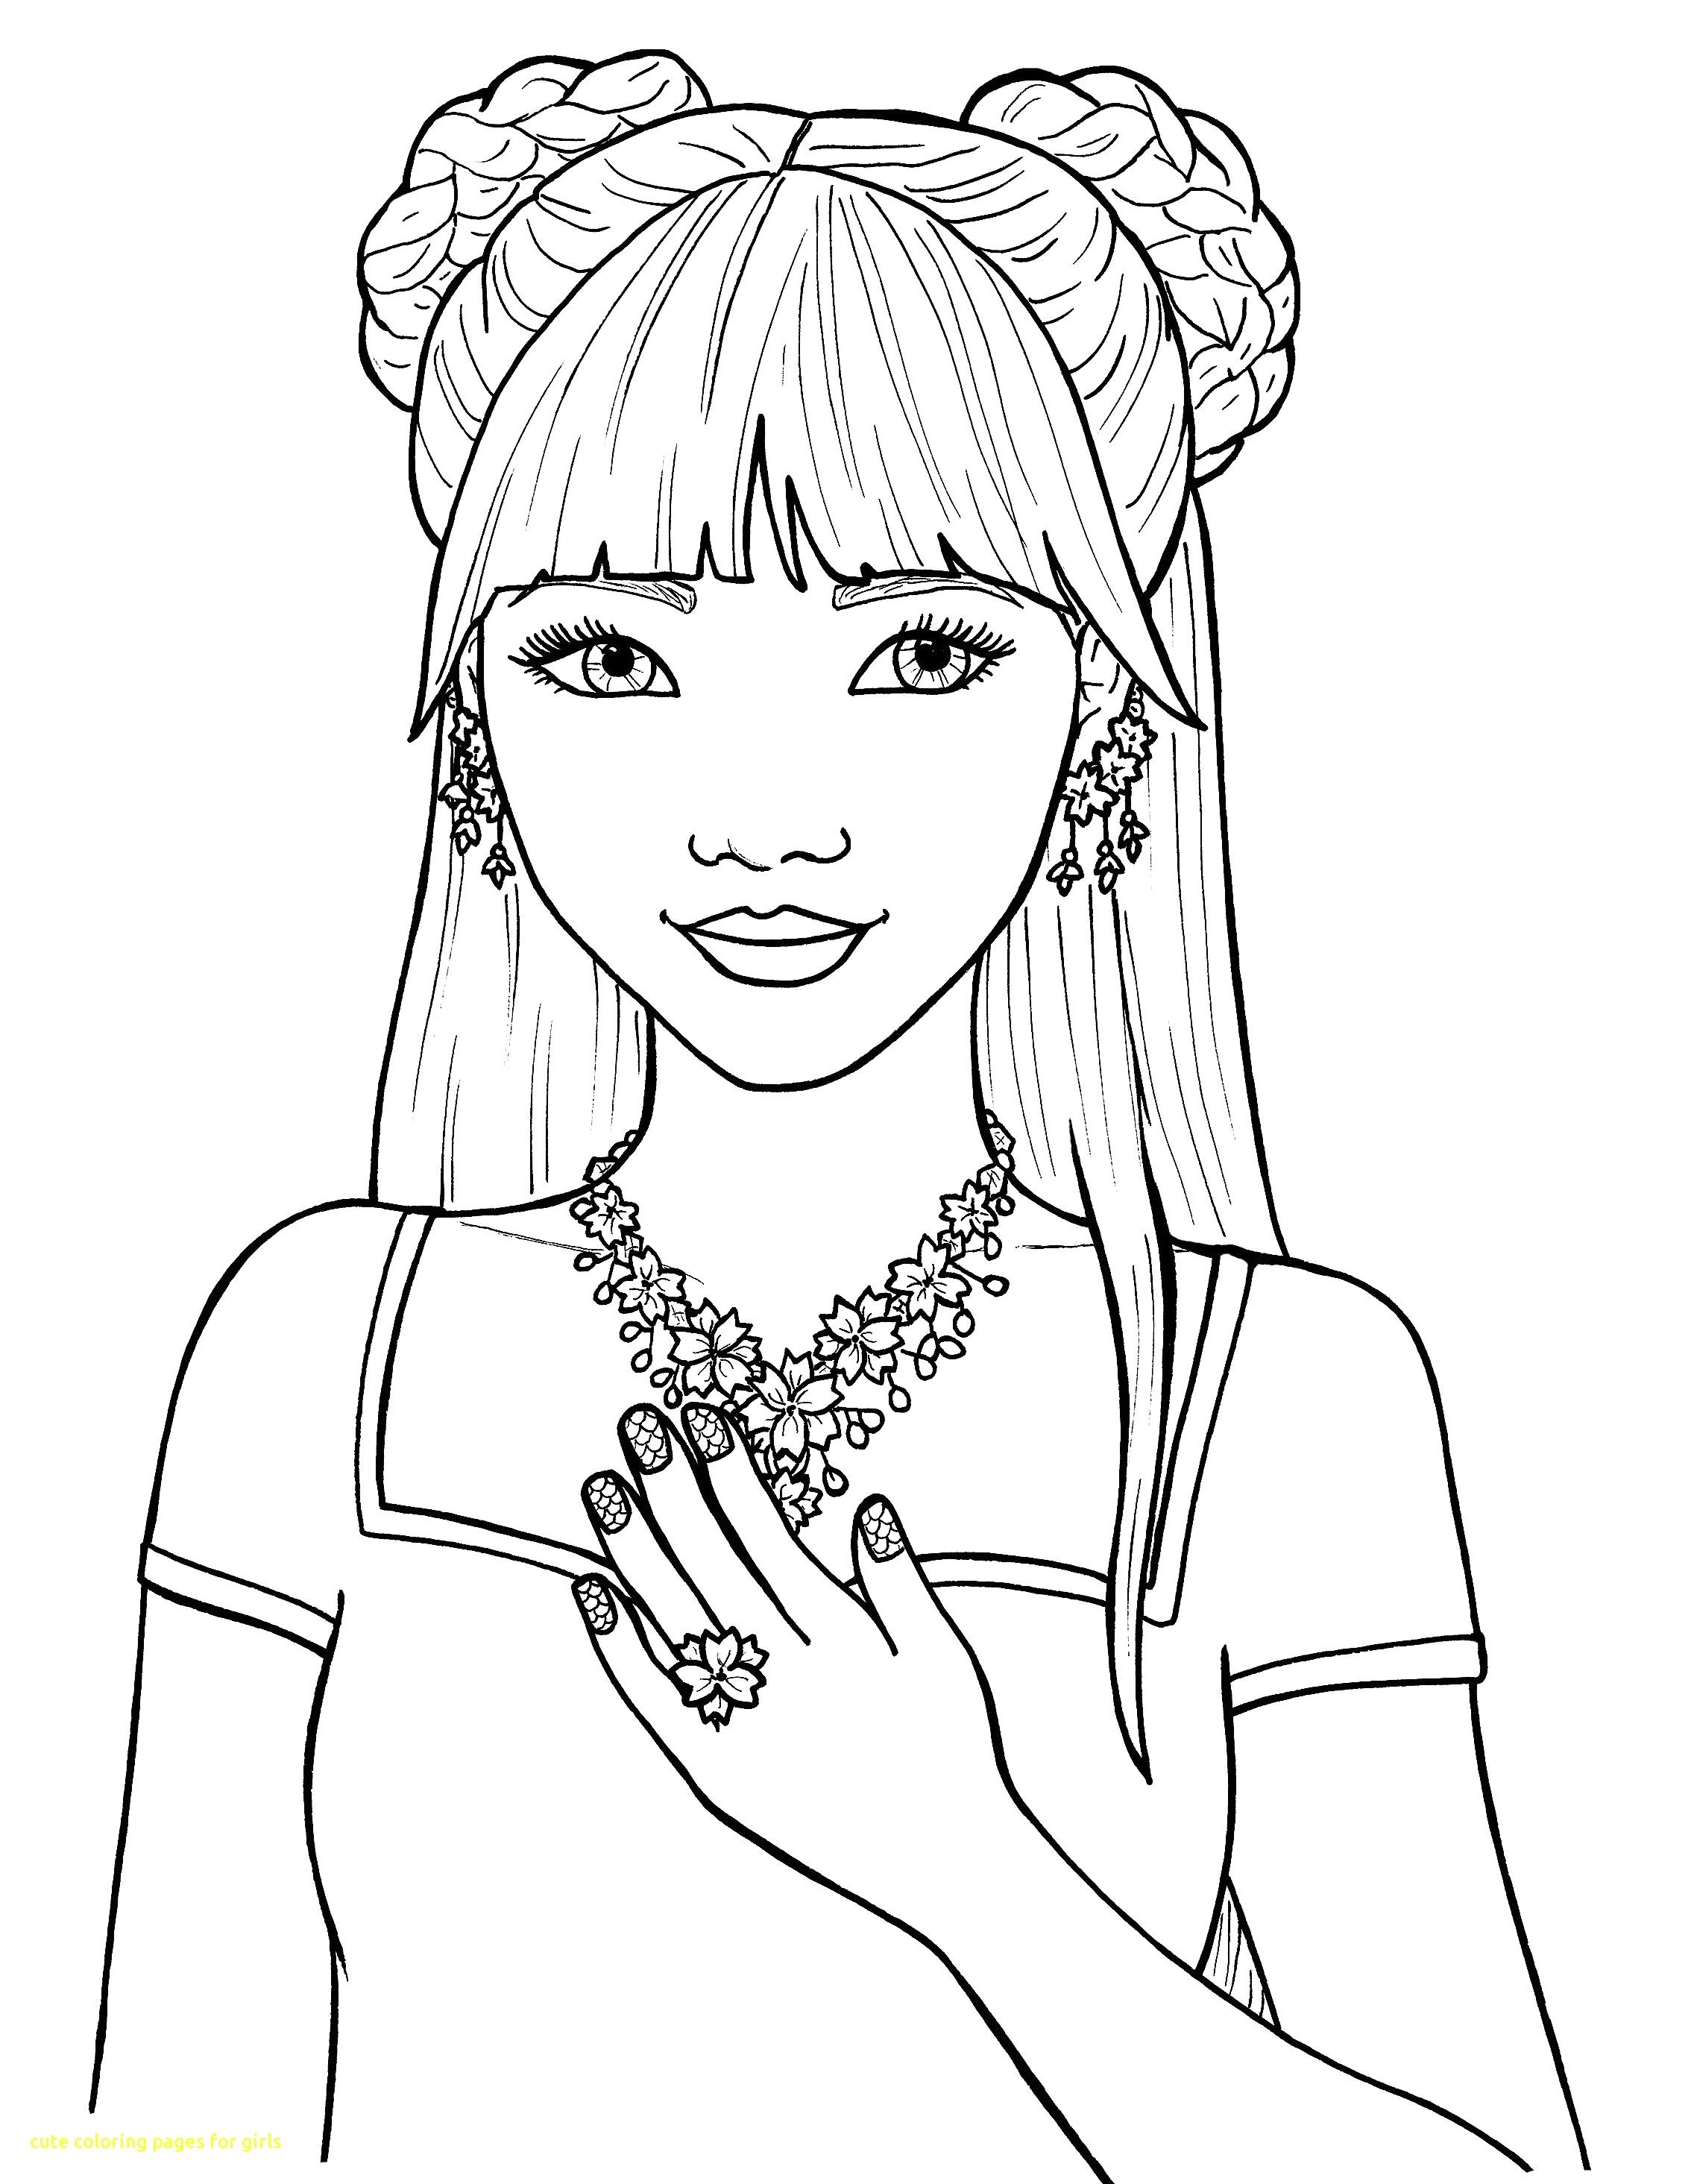 Cute Coloring Pages For Girls With Of Inside Teens Teenage | People  coloring pages, Cute coloring pages, Coloring pages for girls